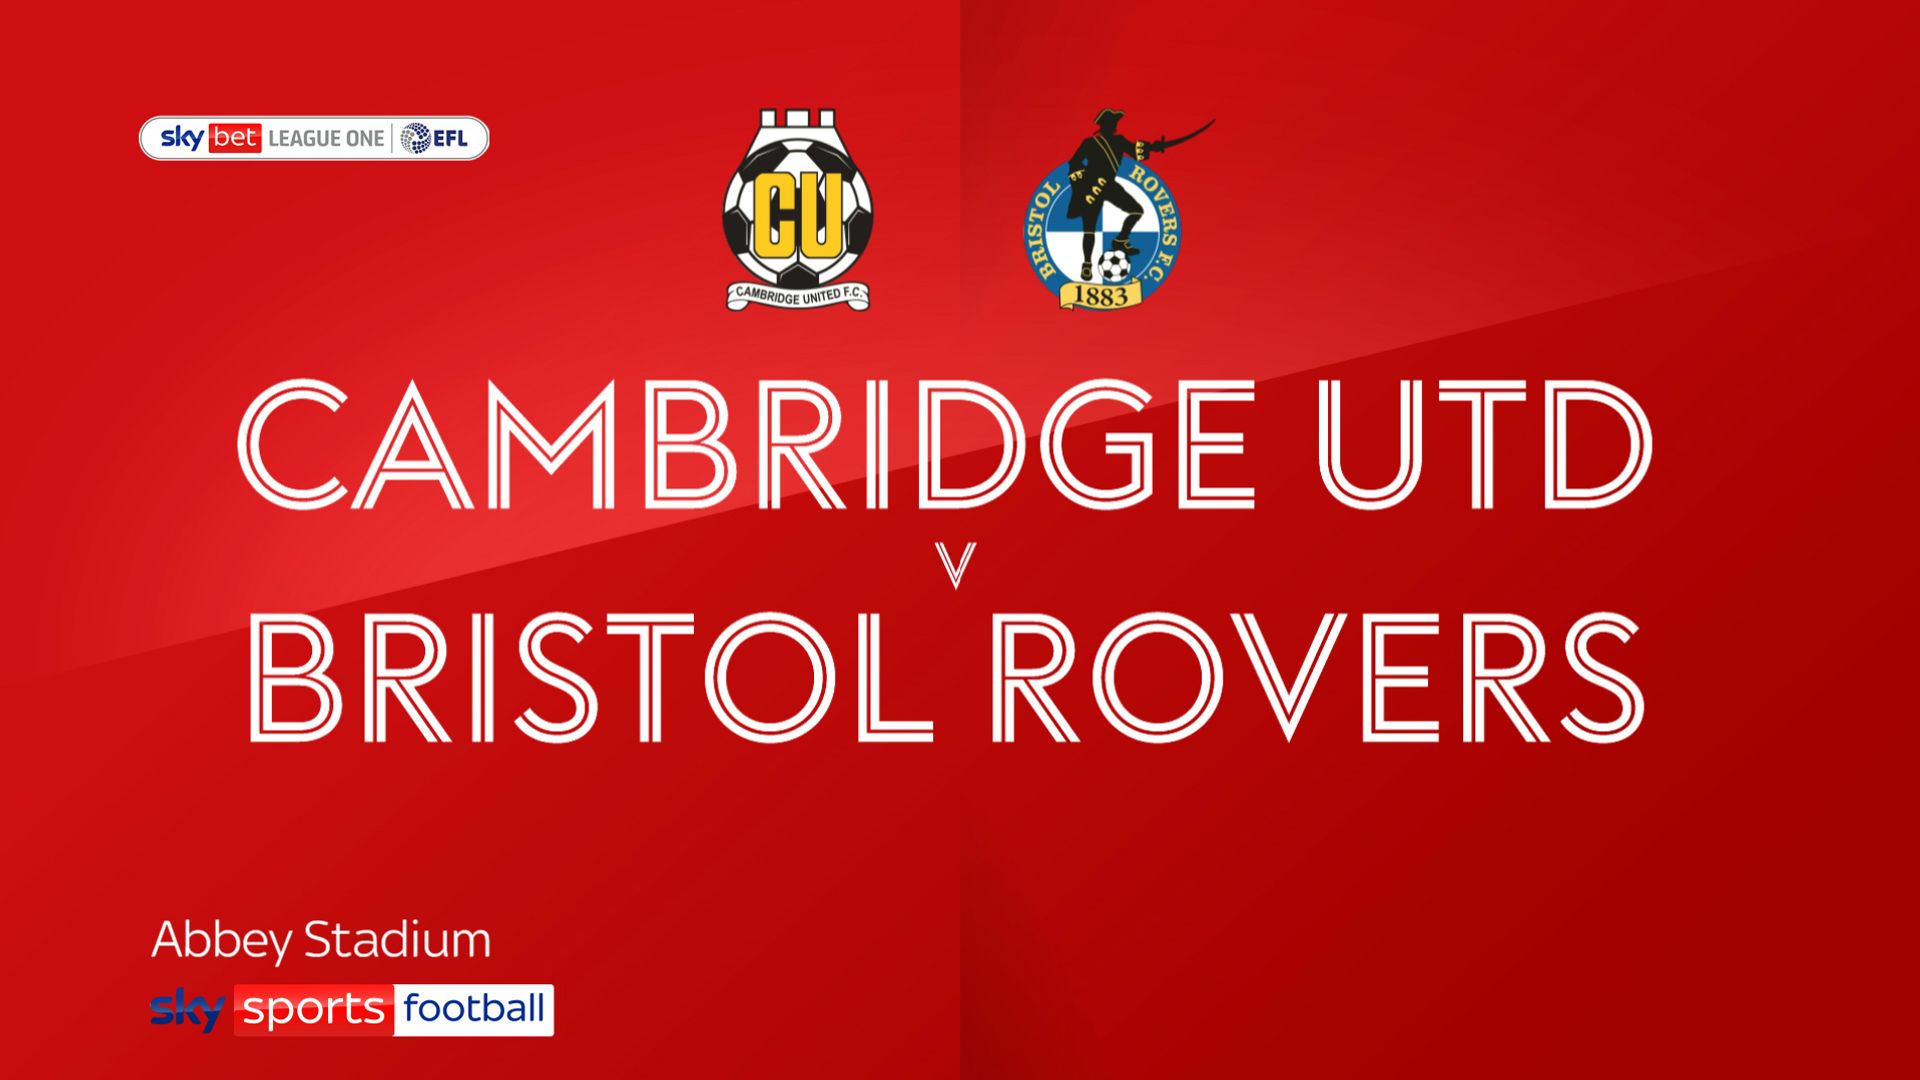 Bristol Rovers hit back to win at Cambridge